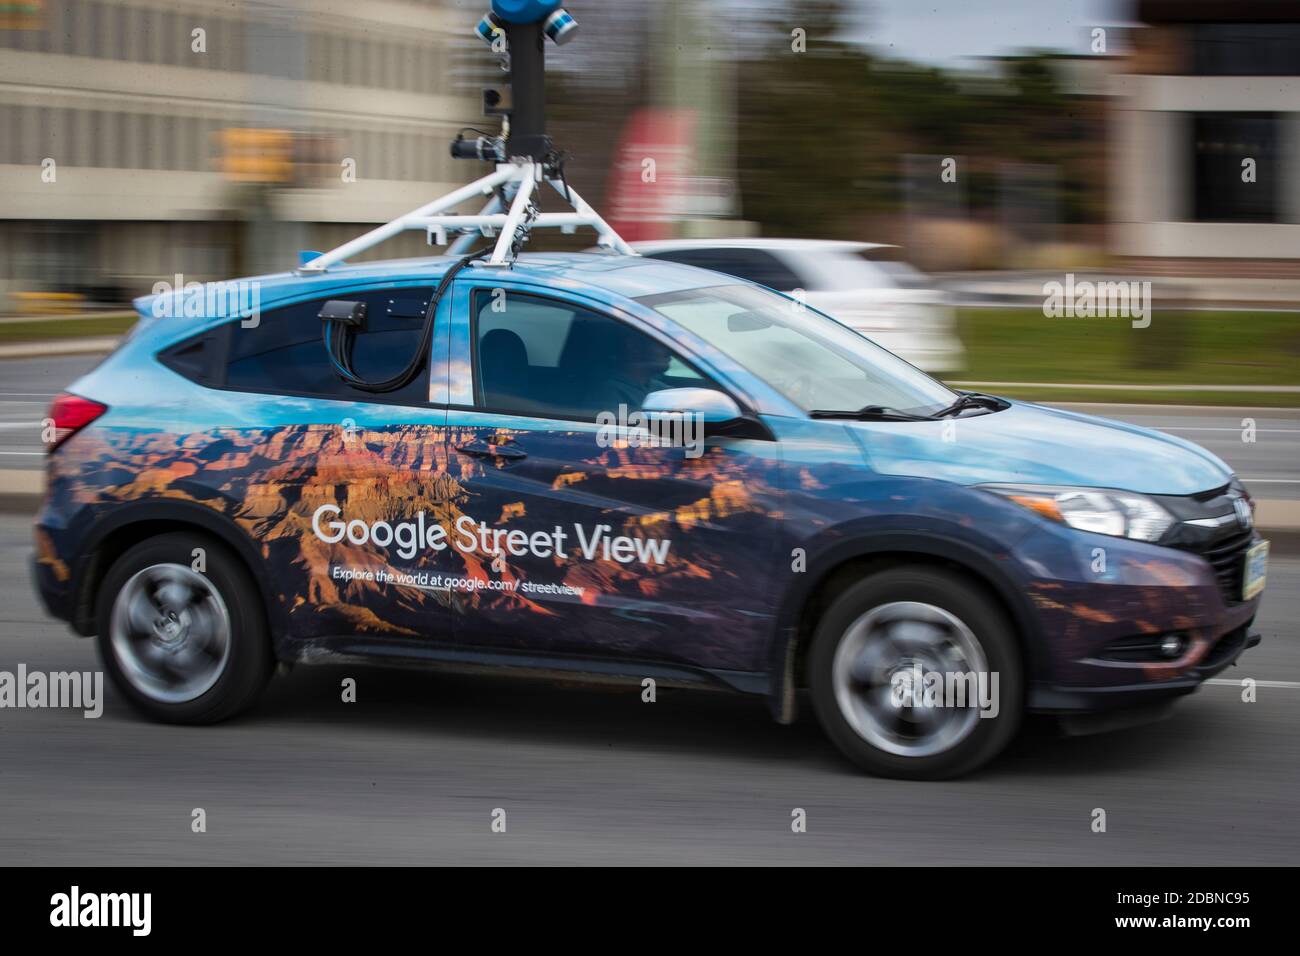 Google street view car with a 360 camera attached to the top in Kingston, Ontario on Tuesday, November 17, 2020. Stock Photo